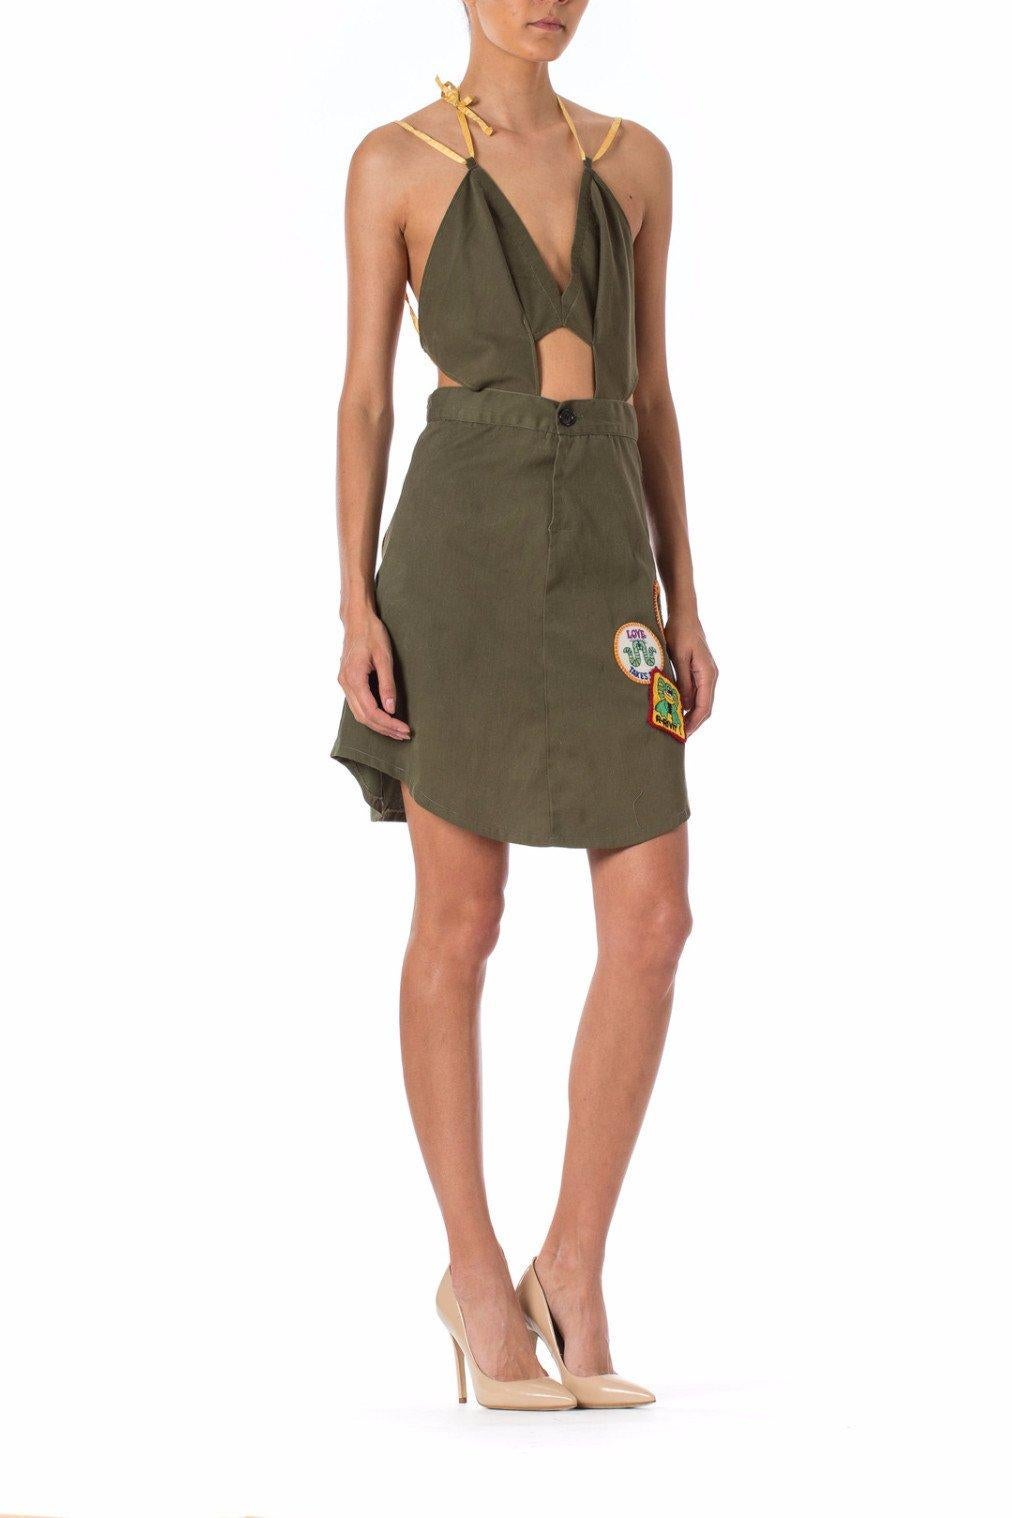 MORPHEW COLLECTION Olive Green Cotton Cut Out Dress Made From Vietnam War Era Surplus Fabric & Vintage Patches
MORPHEW COLLECTION is made entirely by hand in our NYC Ateliér of rare antique materials sourced from around the globe. Our sustainable